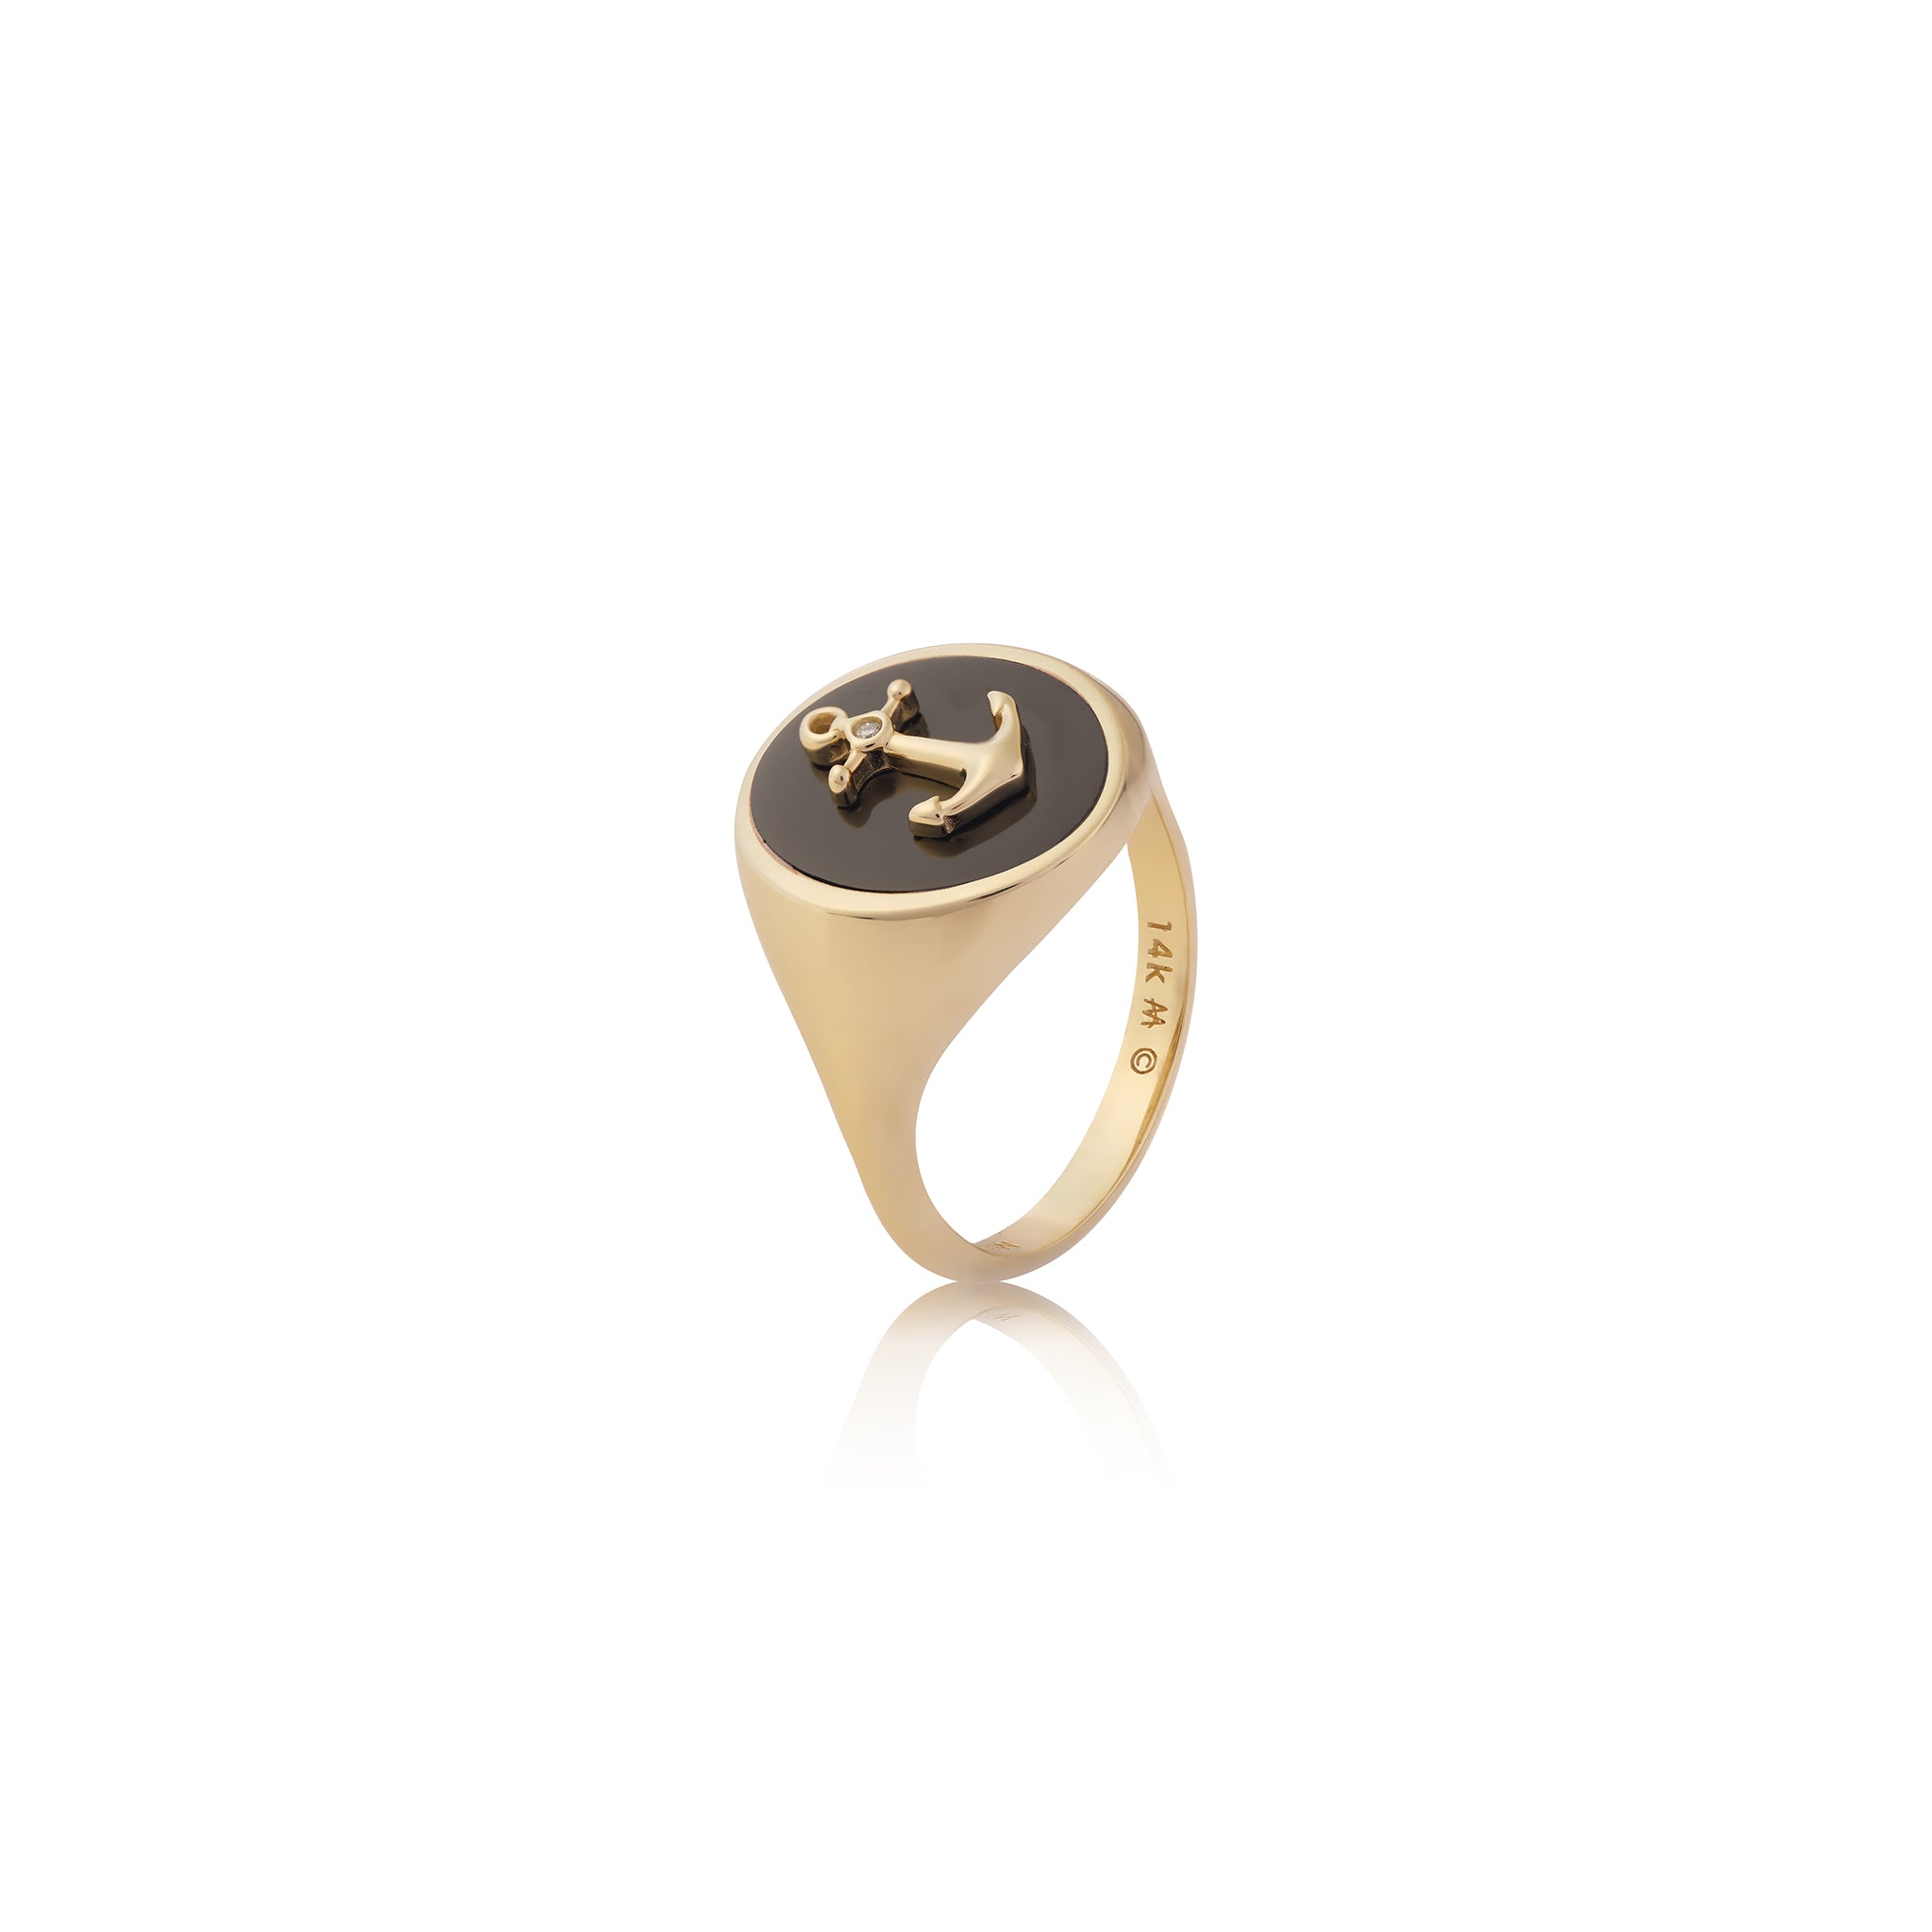 Sealife Anchor Signet Ring in Gold with Diamond - 14mm